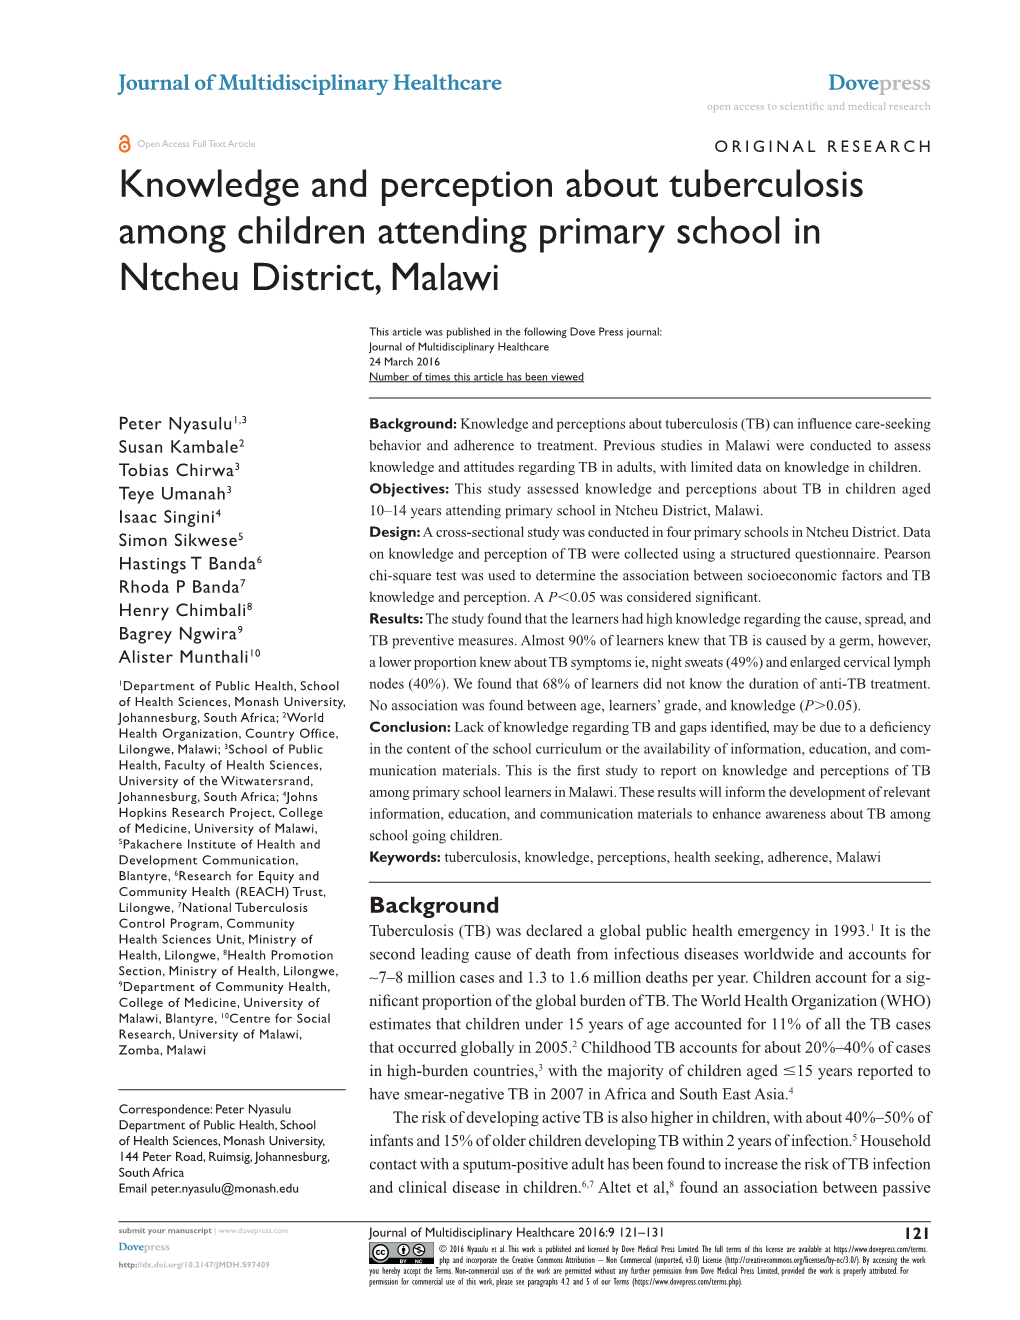 Knowledge and Perception About Tuberculosis Among Children Attending Primary School in Ntcheu District, Malawi